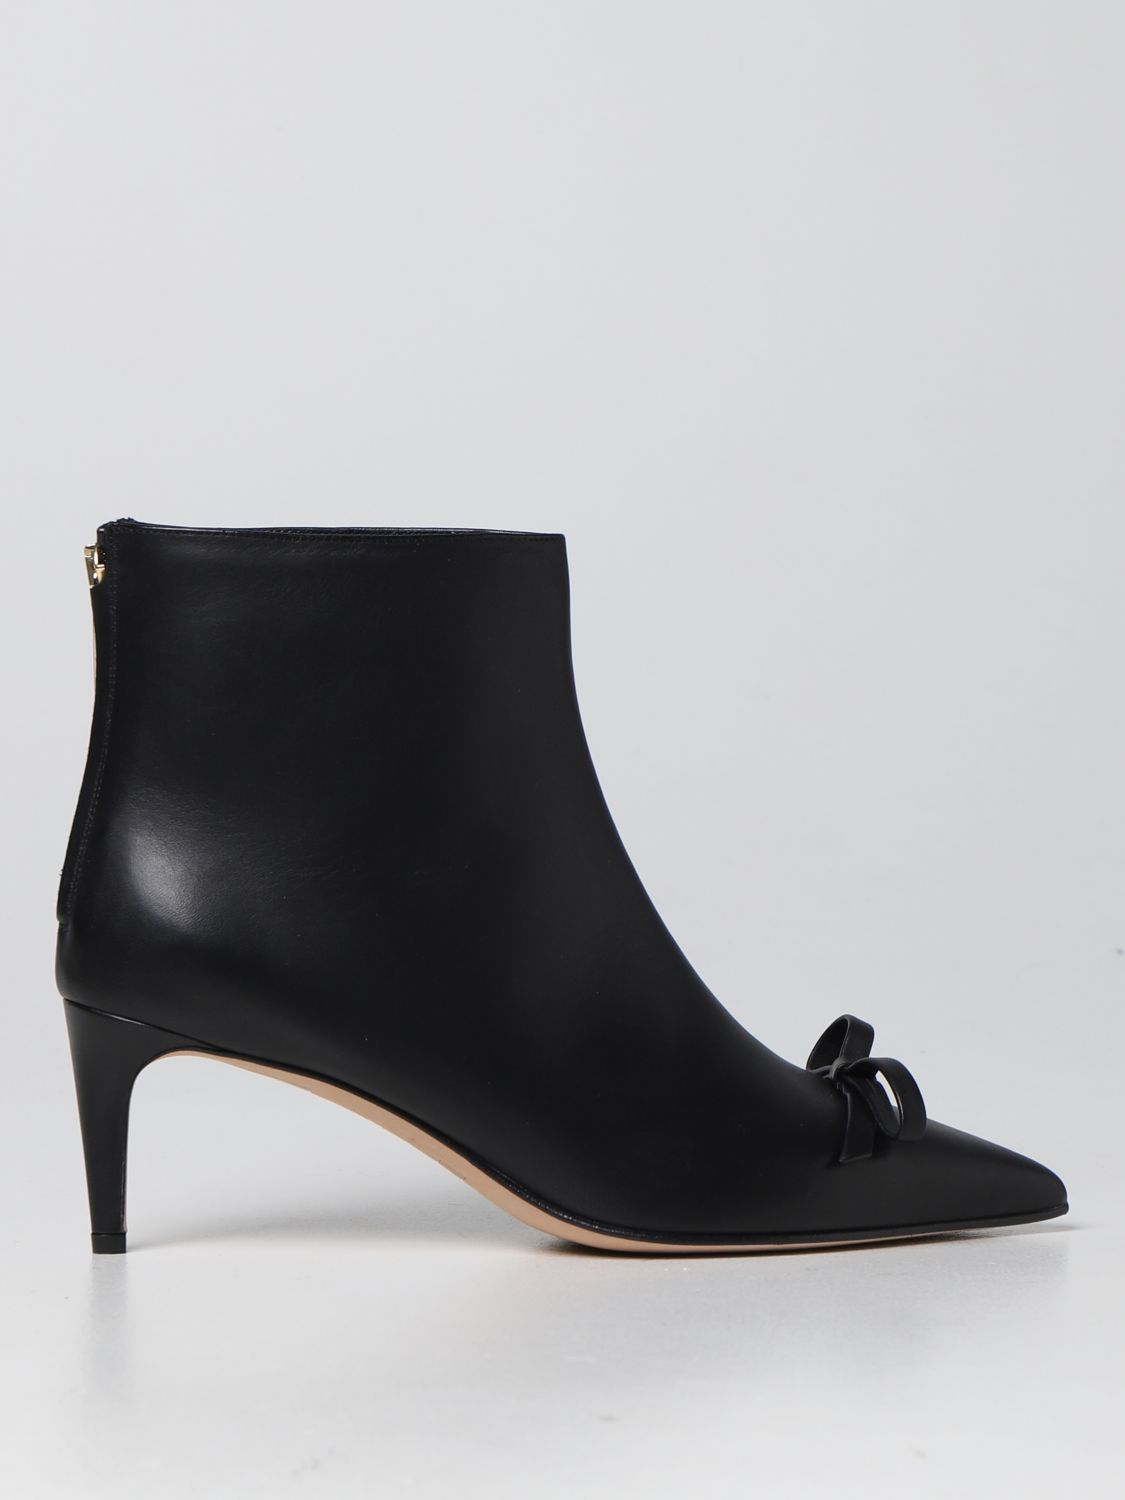 Heeled booties Red(V): Red (V) ankle boots in smooth leather black 1